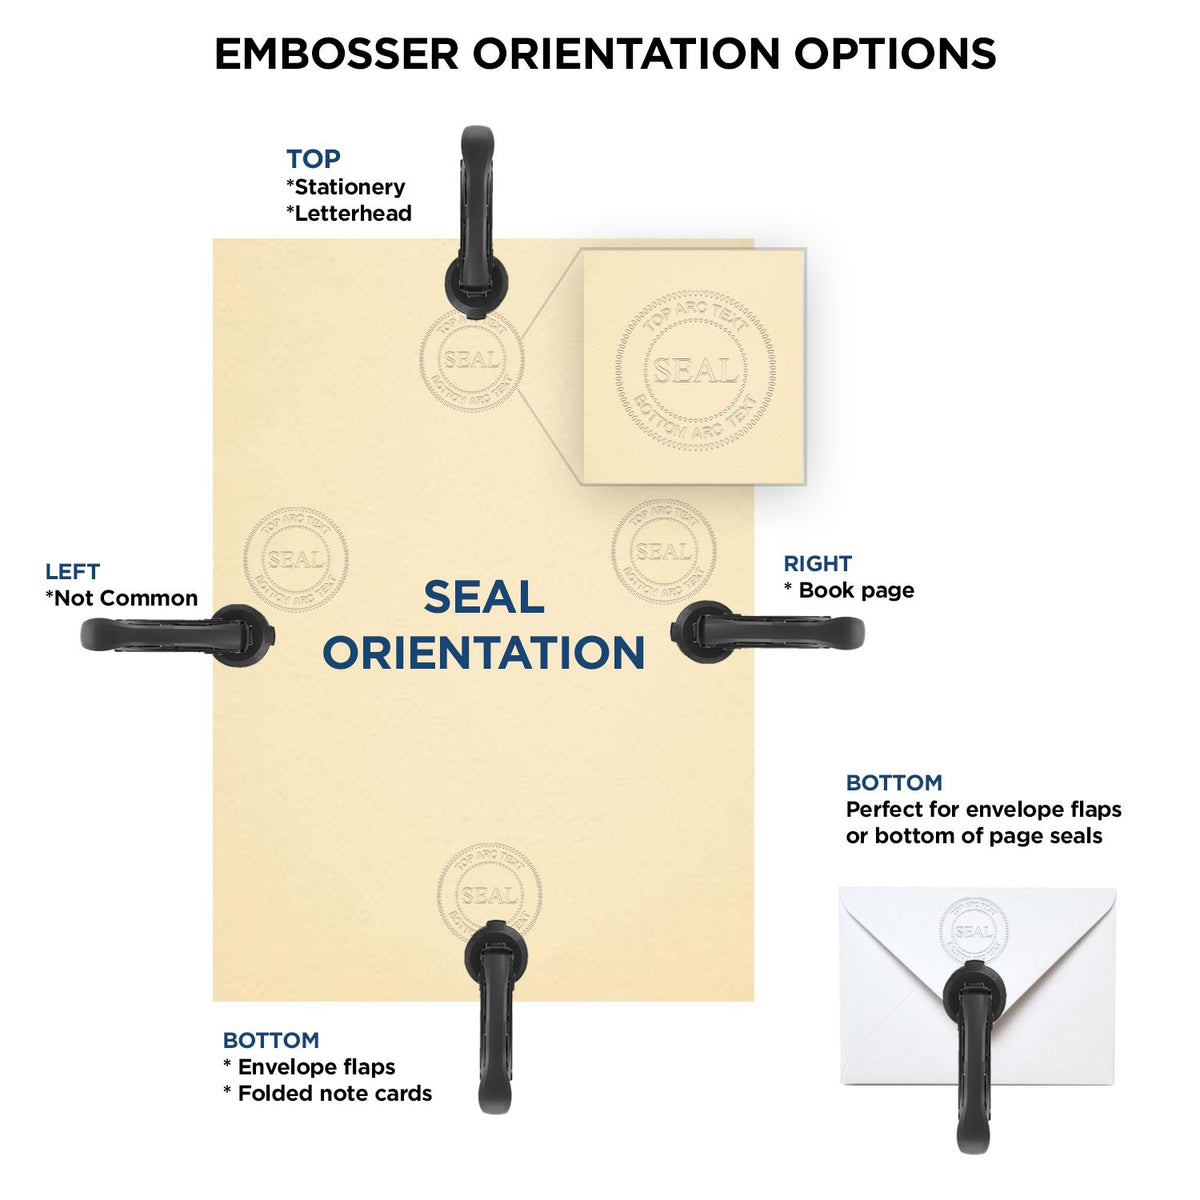 An infographic for the Gift Alabama Land Surveyor Seal showing embosser orientation, this is showing examples of a top, bottom, right and left insert.